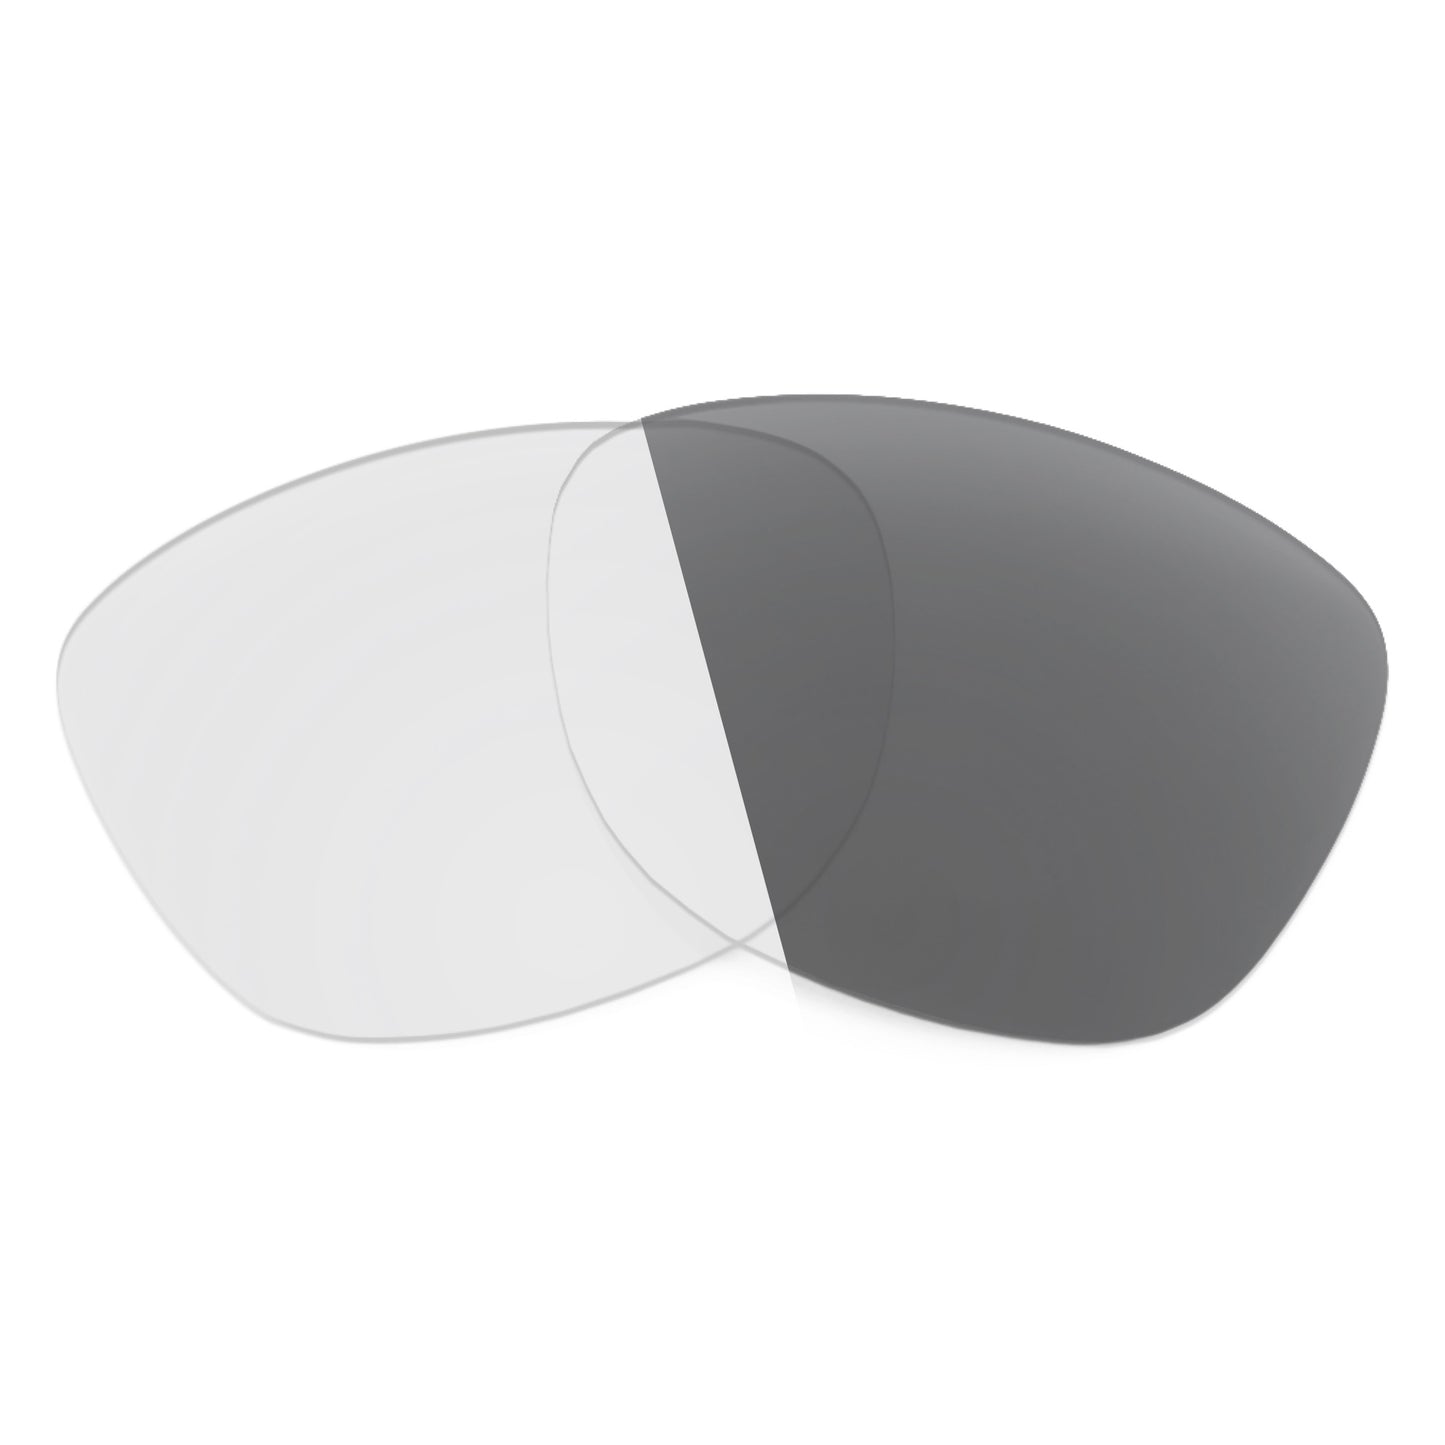 Revant replacement lenses for Ray-Ban RB4221 50mm Non-Polarized Adapt Gray Photochromic